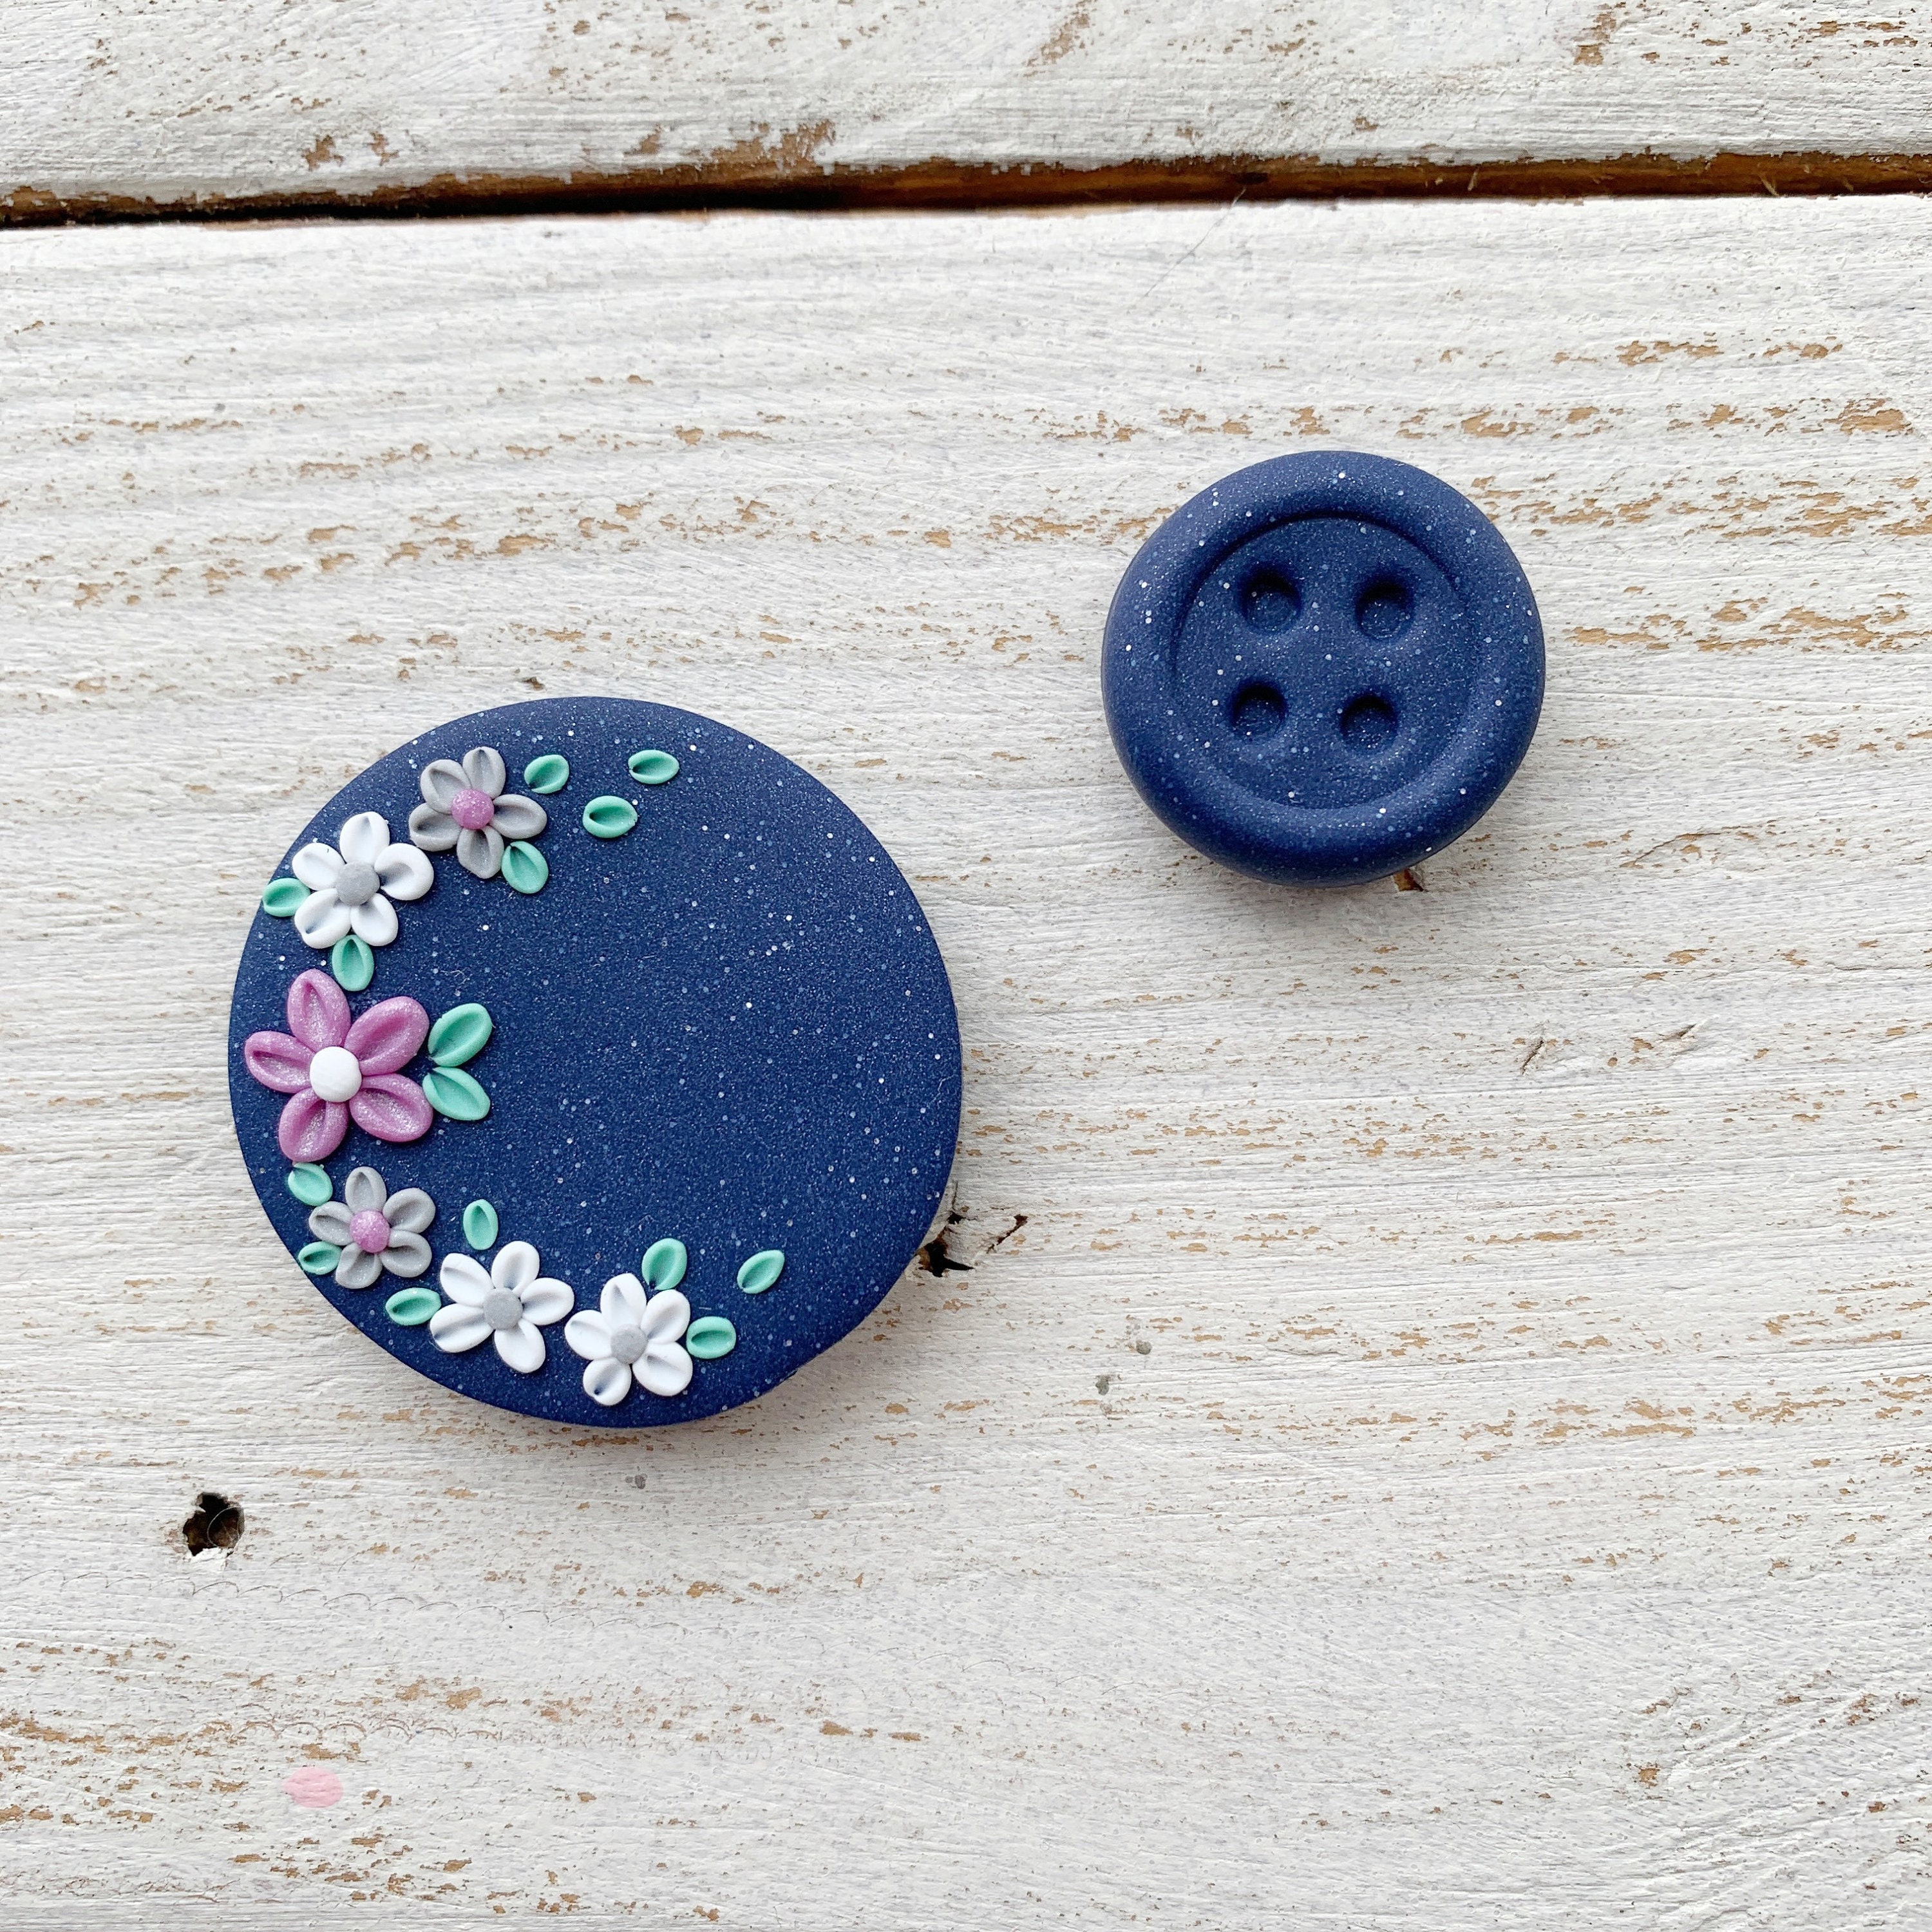 Floral Cross Stitch Needle Minder Magnetic Needle Keeper Holder Embroidery DIY